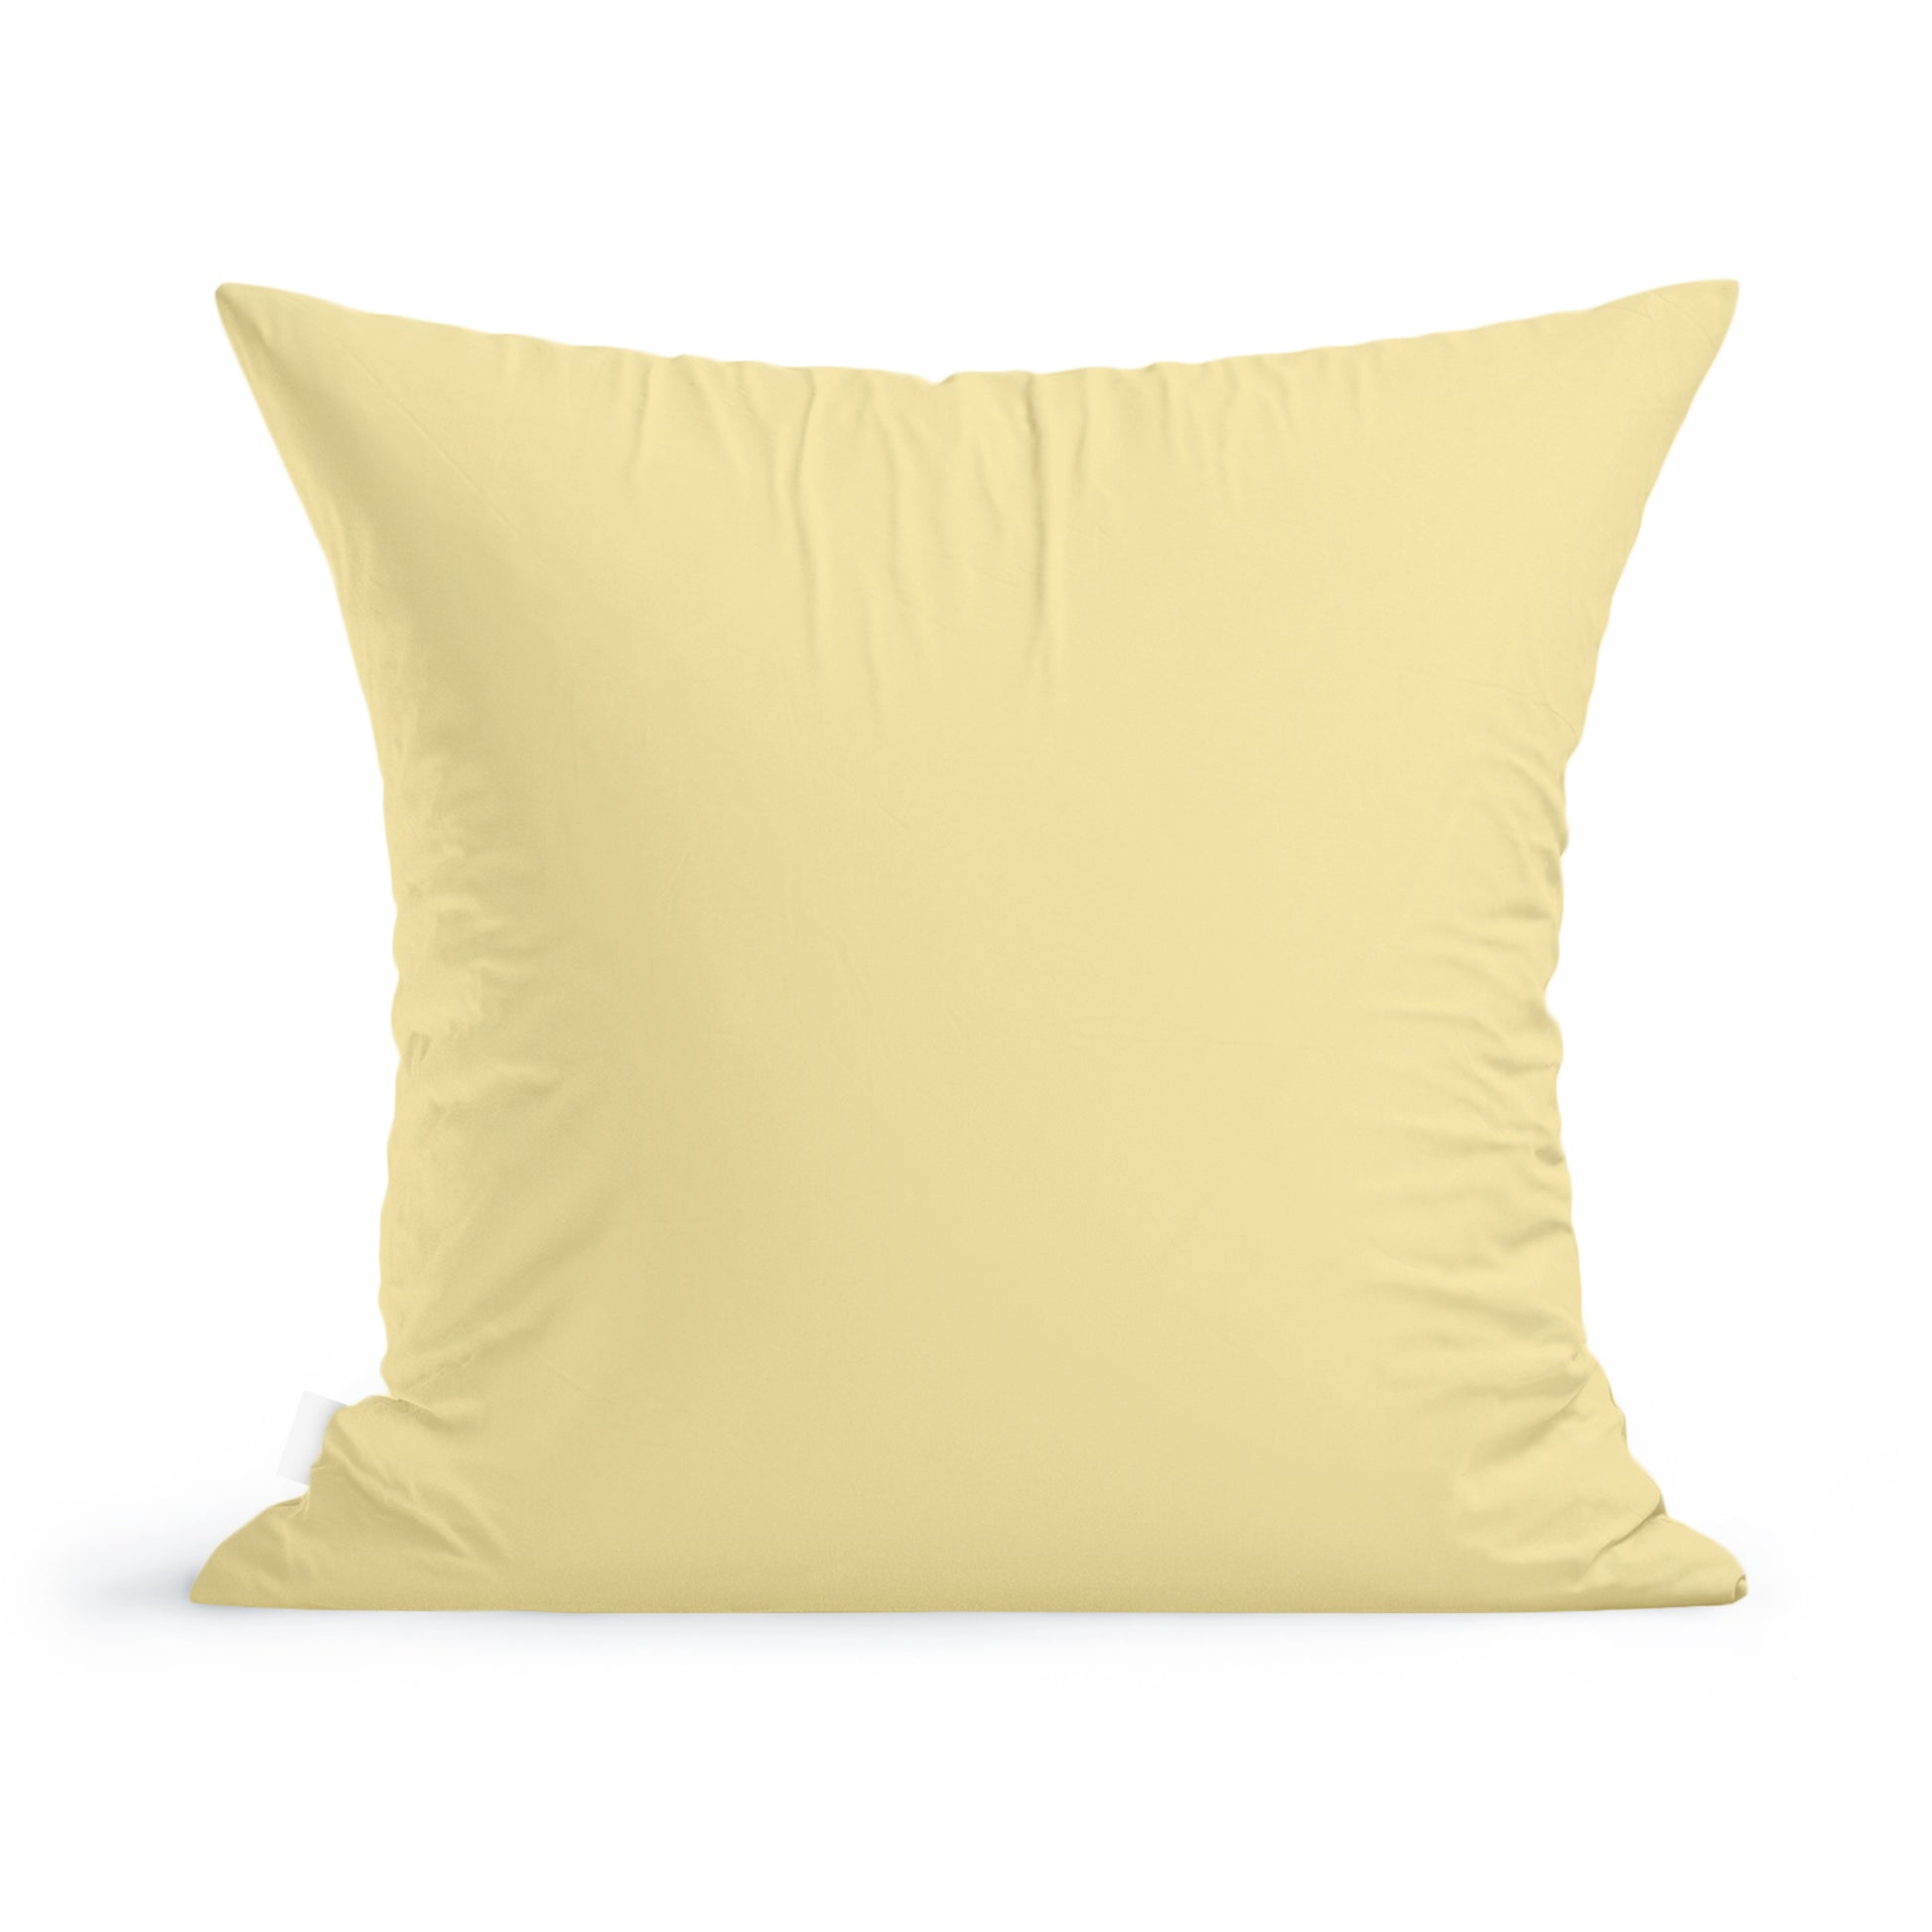 A plain pale yellow square cotton Little Birds Pillow by Rustic County isolated on a white background.